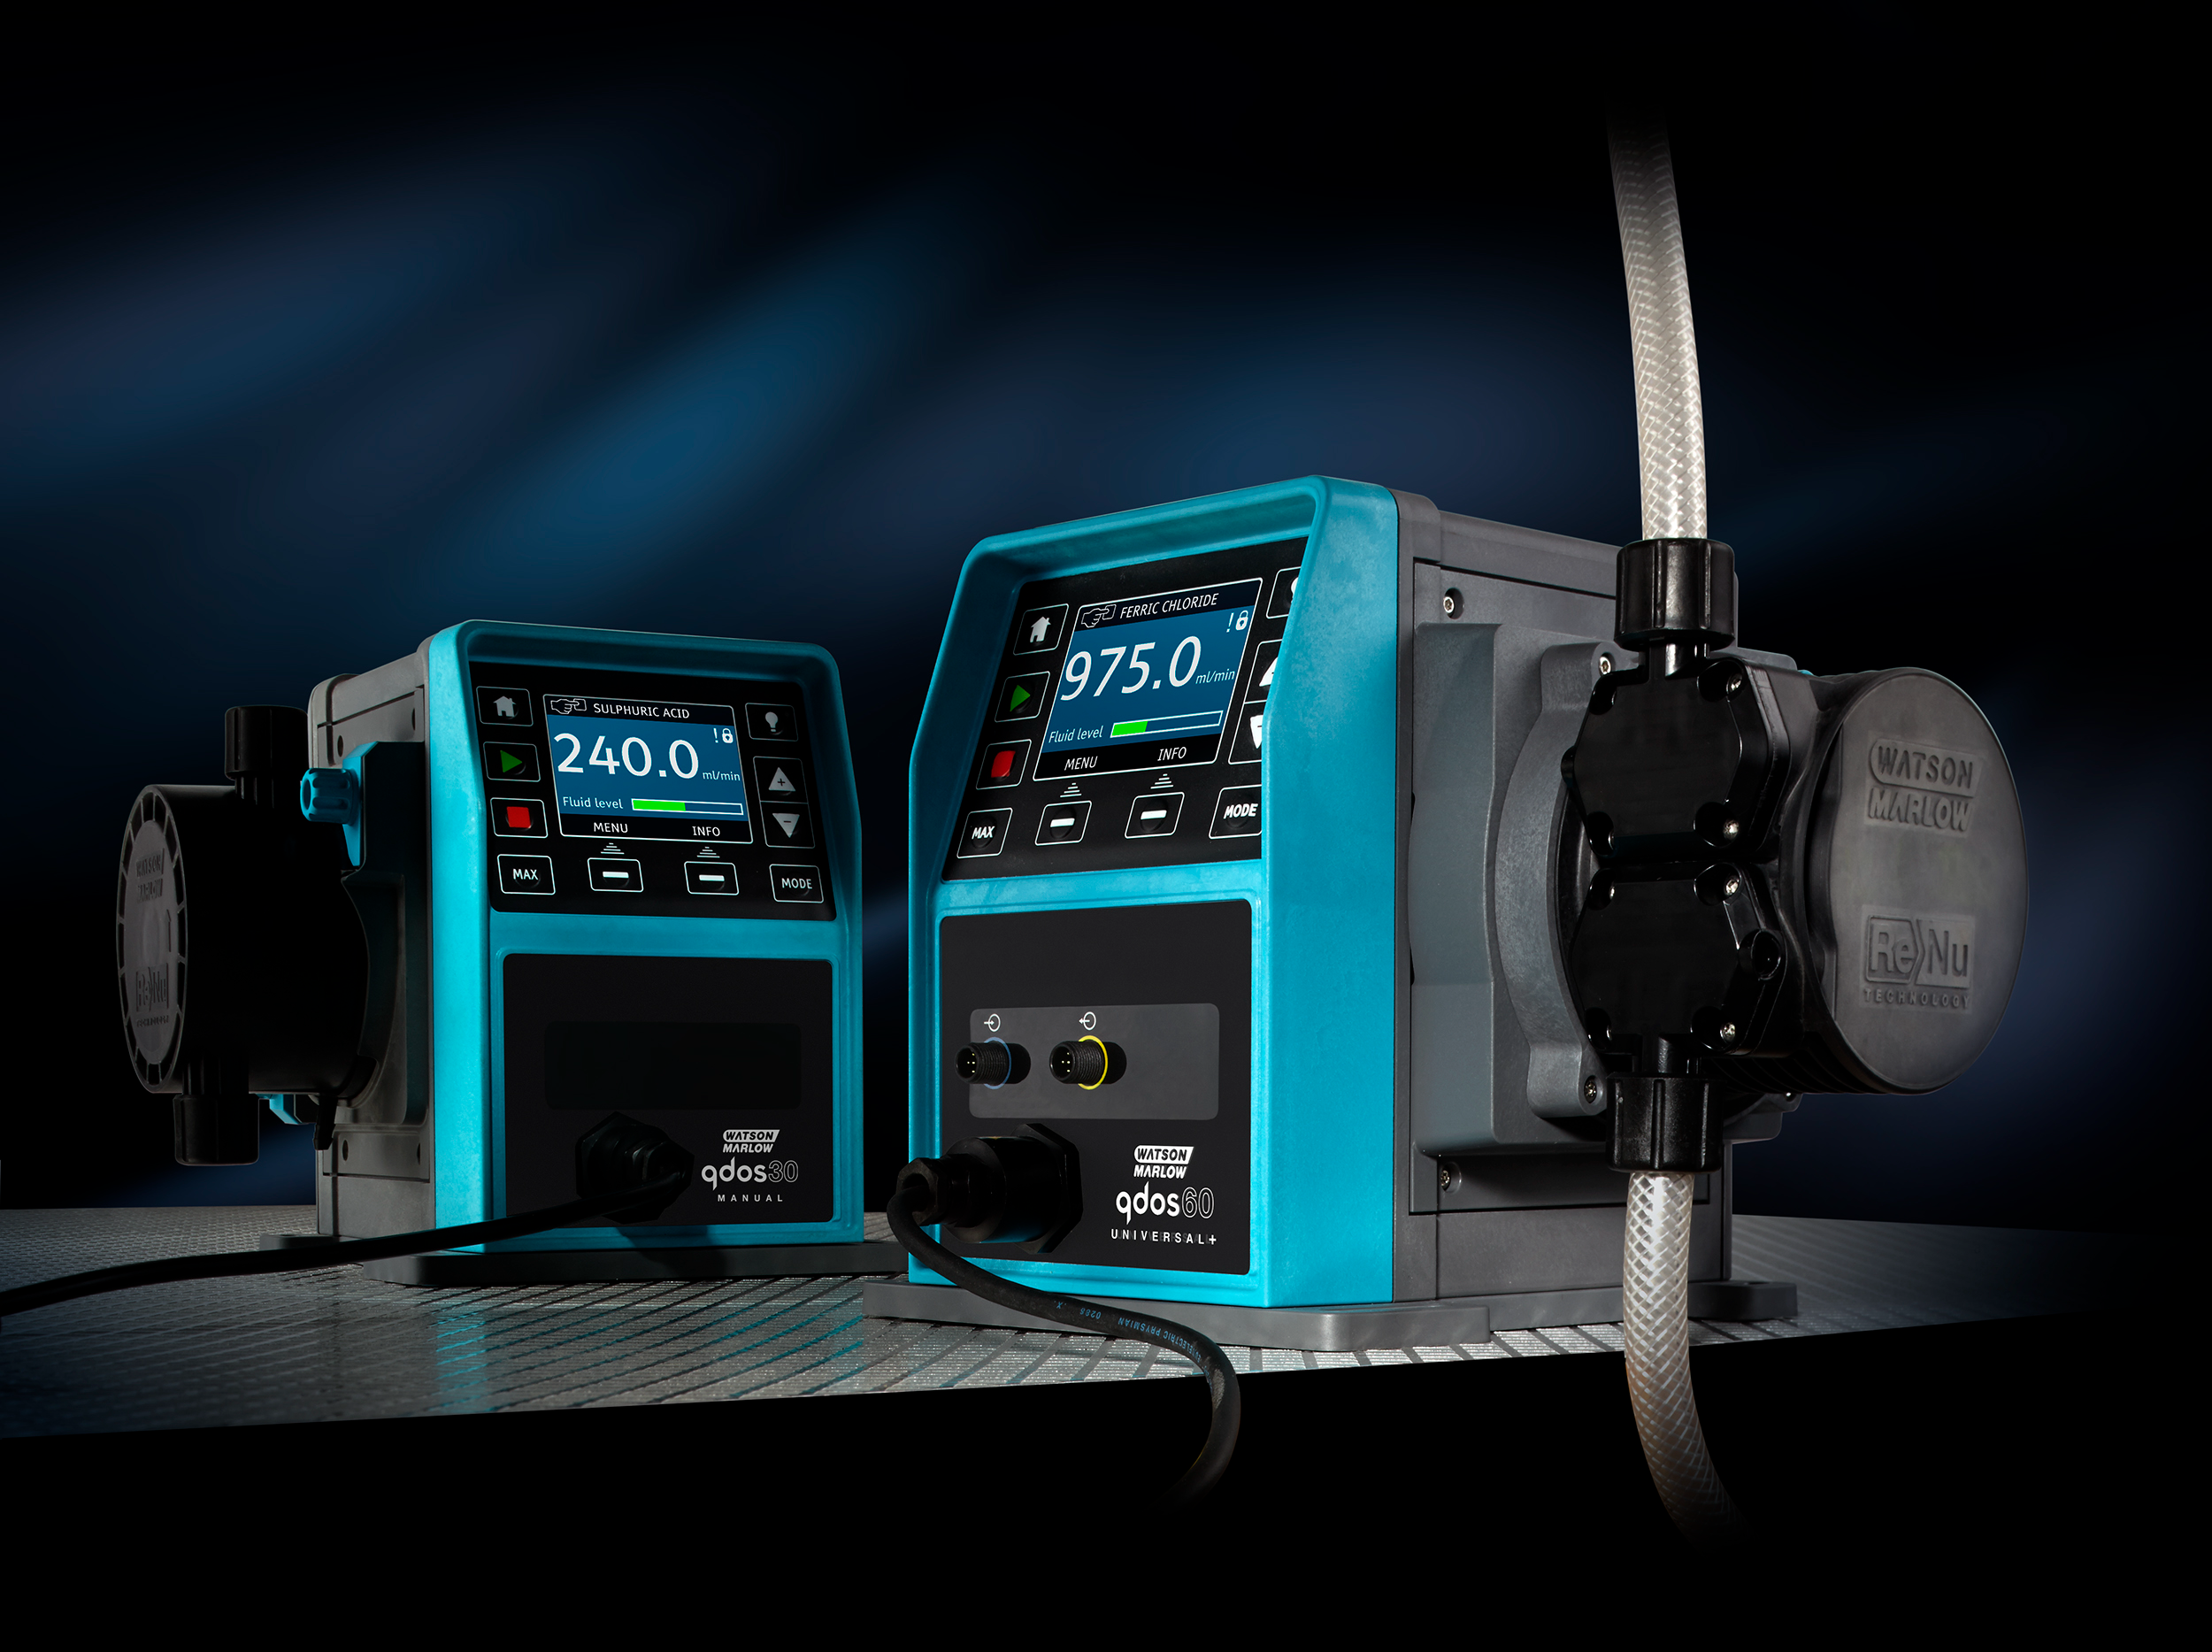 Peristaltic pumps gain improved coverage in WIMES